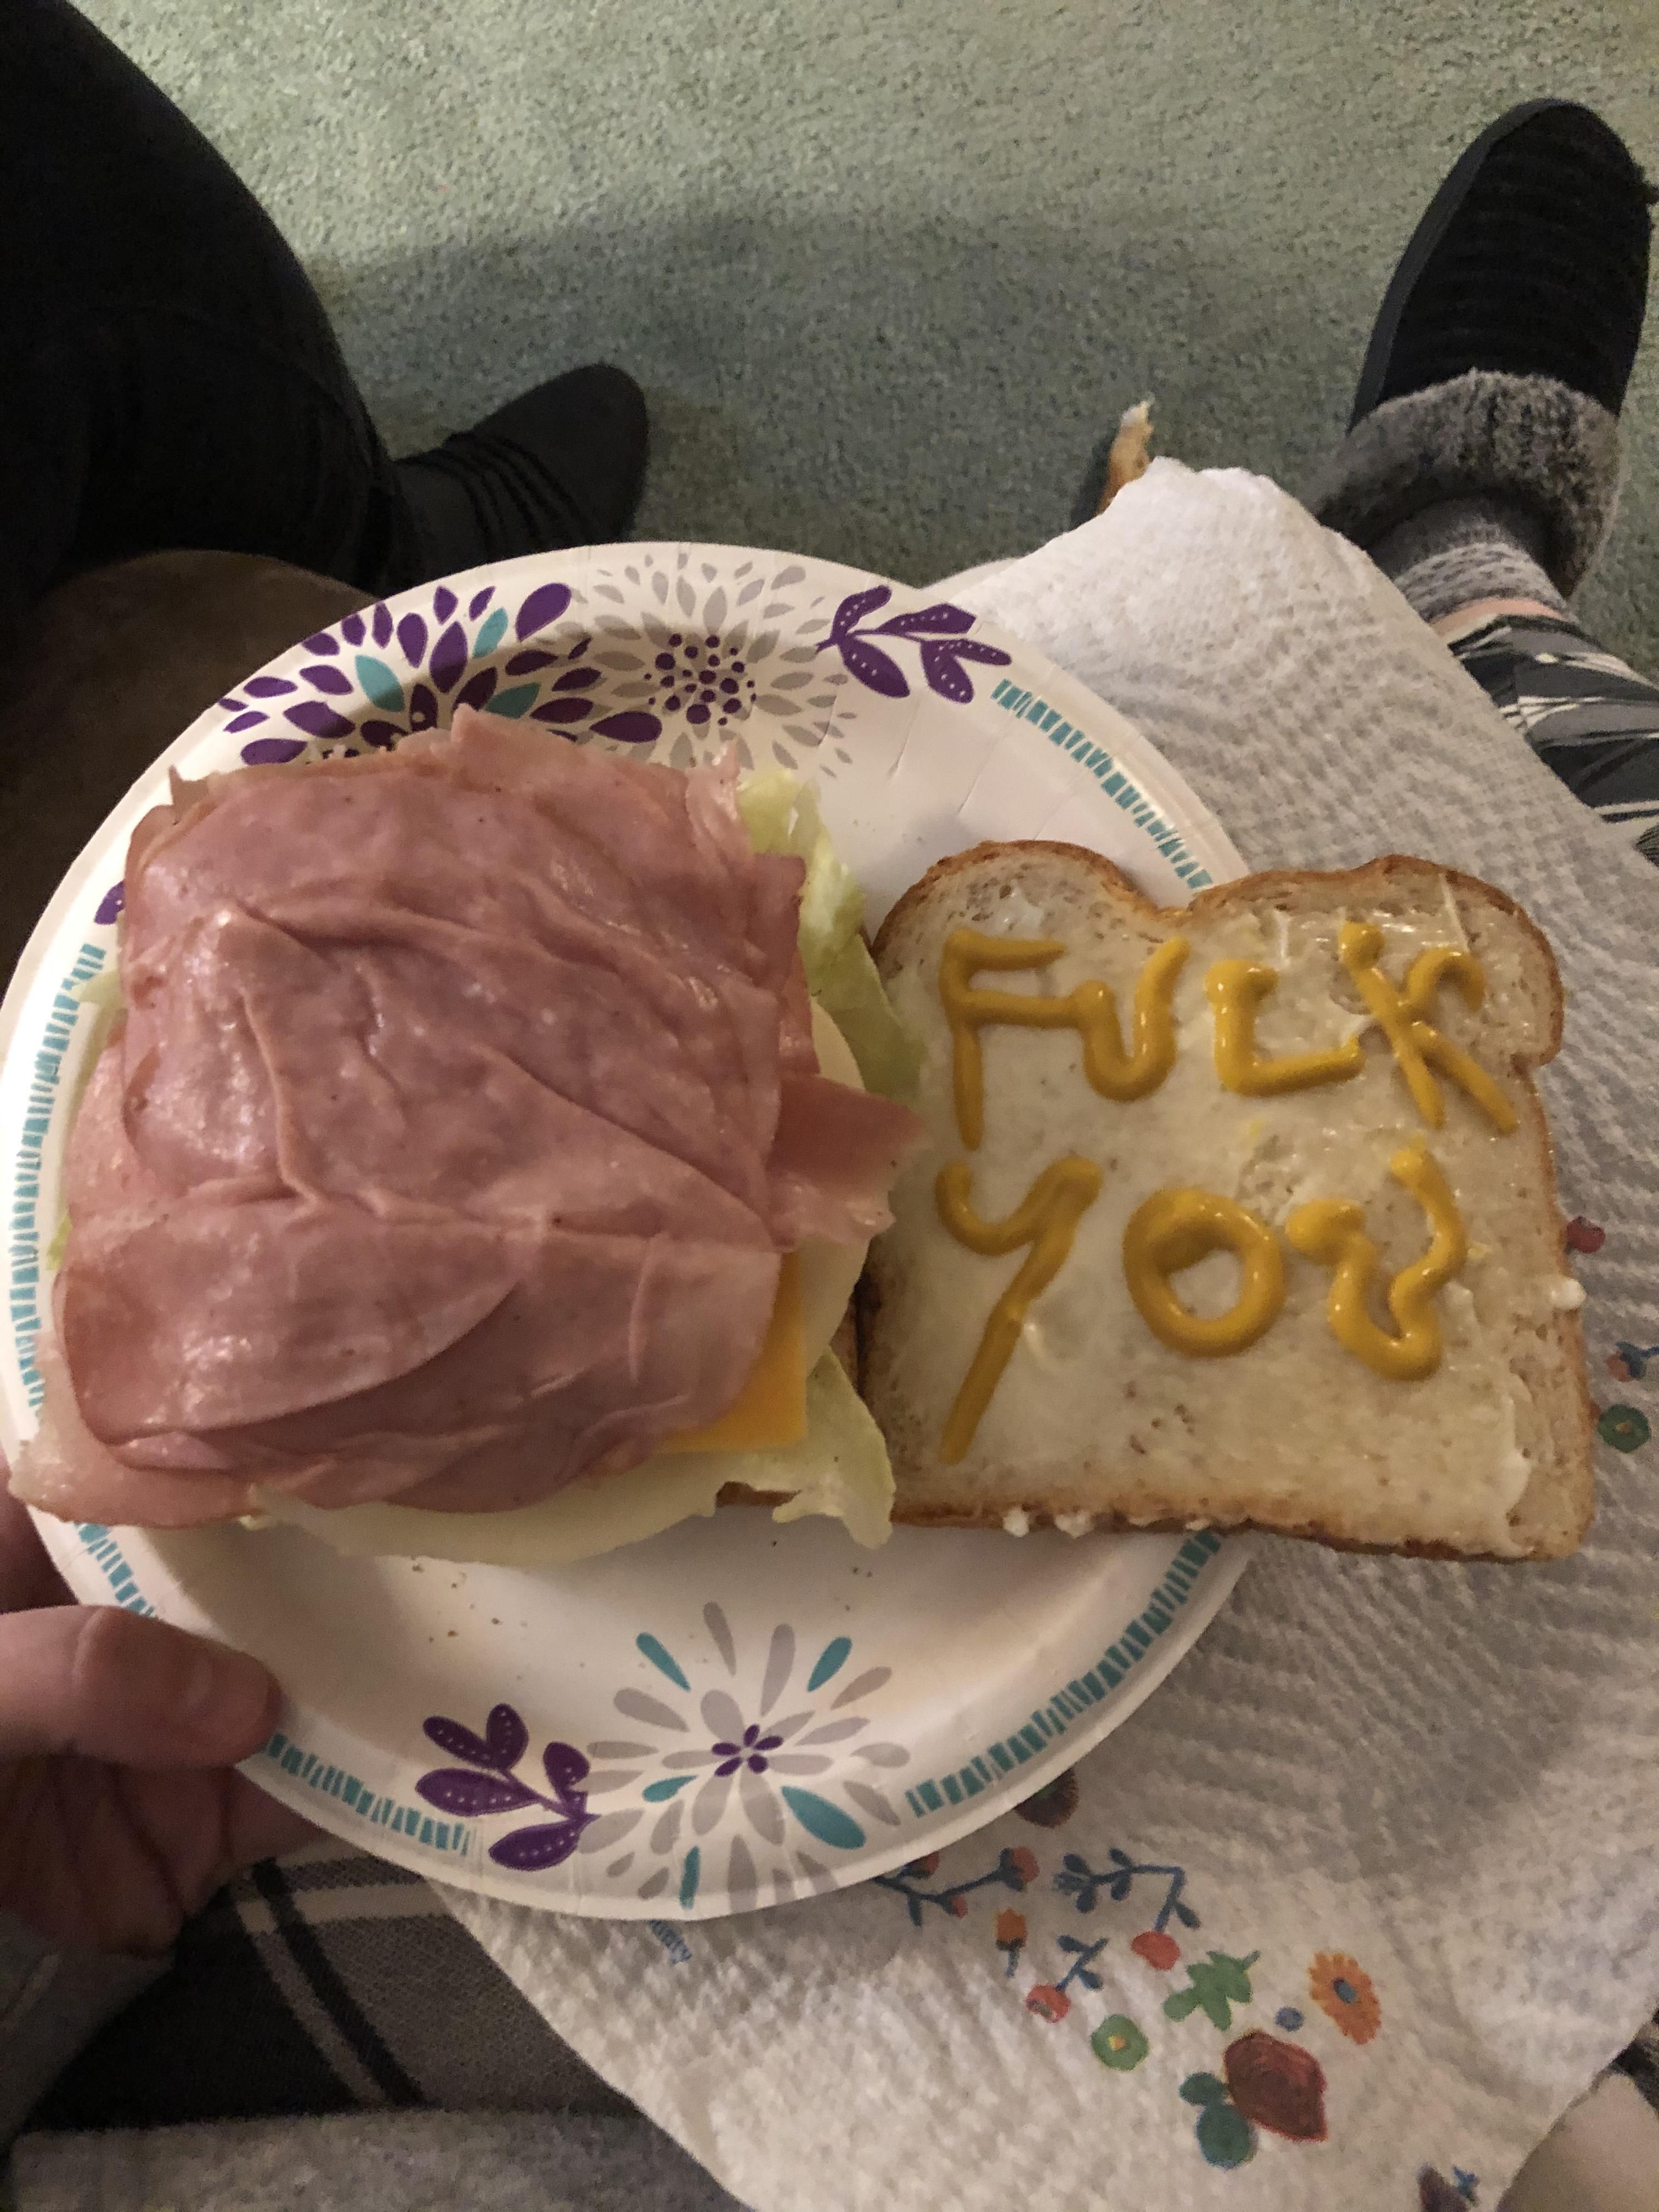 My brother offered my mom a sandwich, she said no and then I said “Well how rude, I want a sandwich!” He did not disappoint.